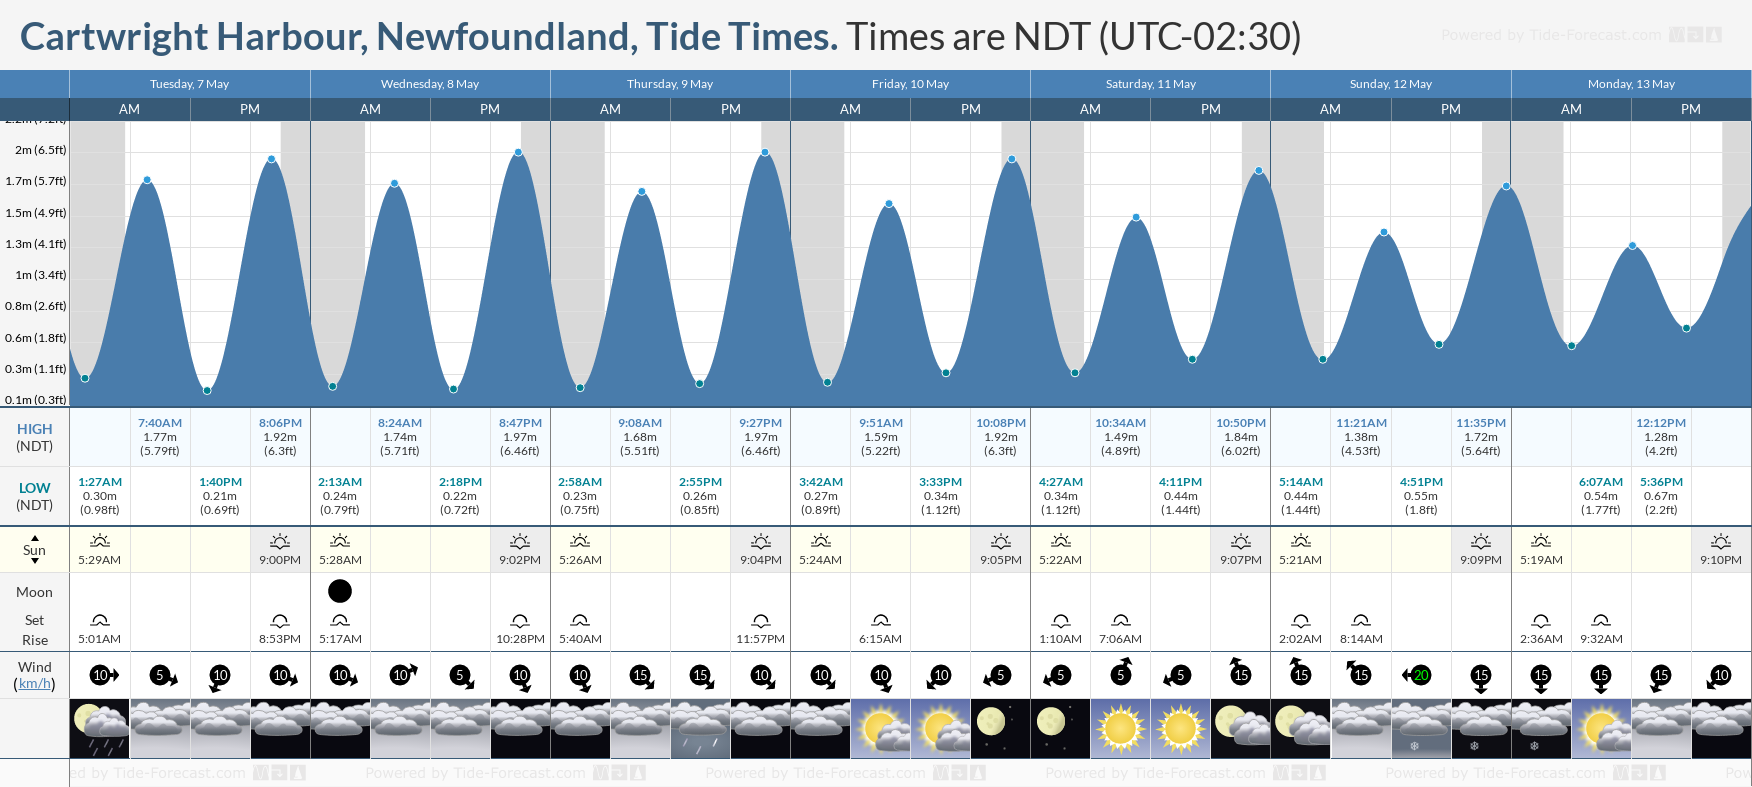 Cartwright Harbour, Newfoundland Tide Chart including high and low tide tide times for the next 7 days